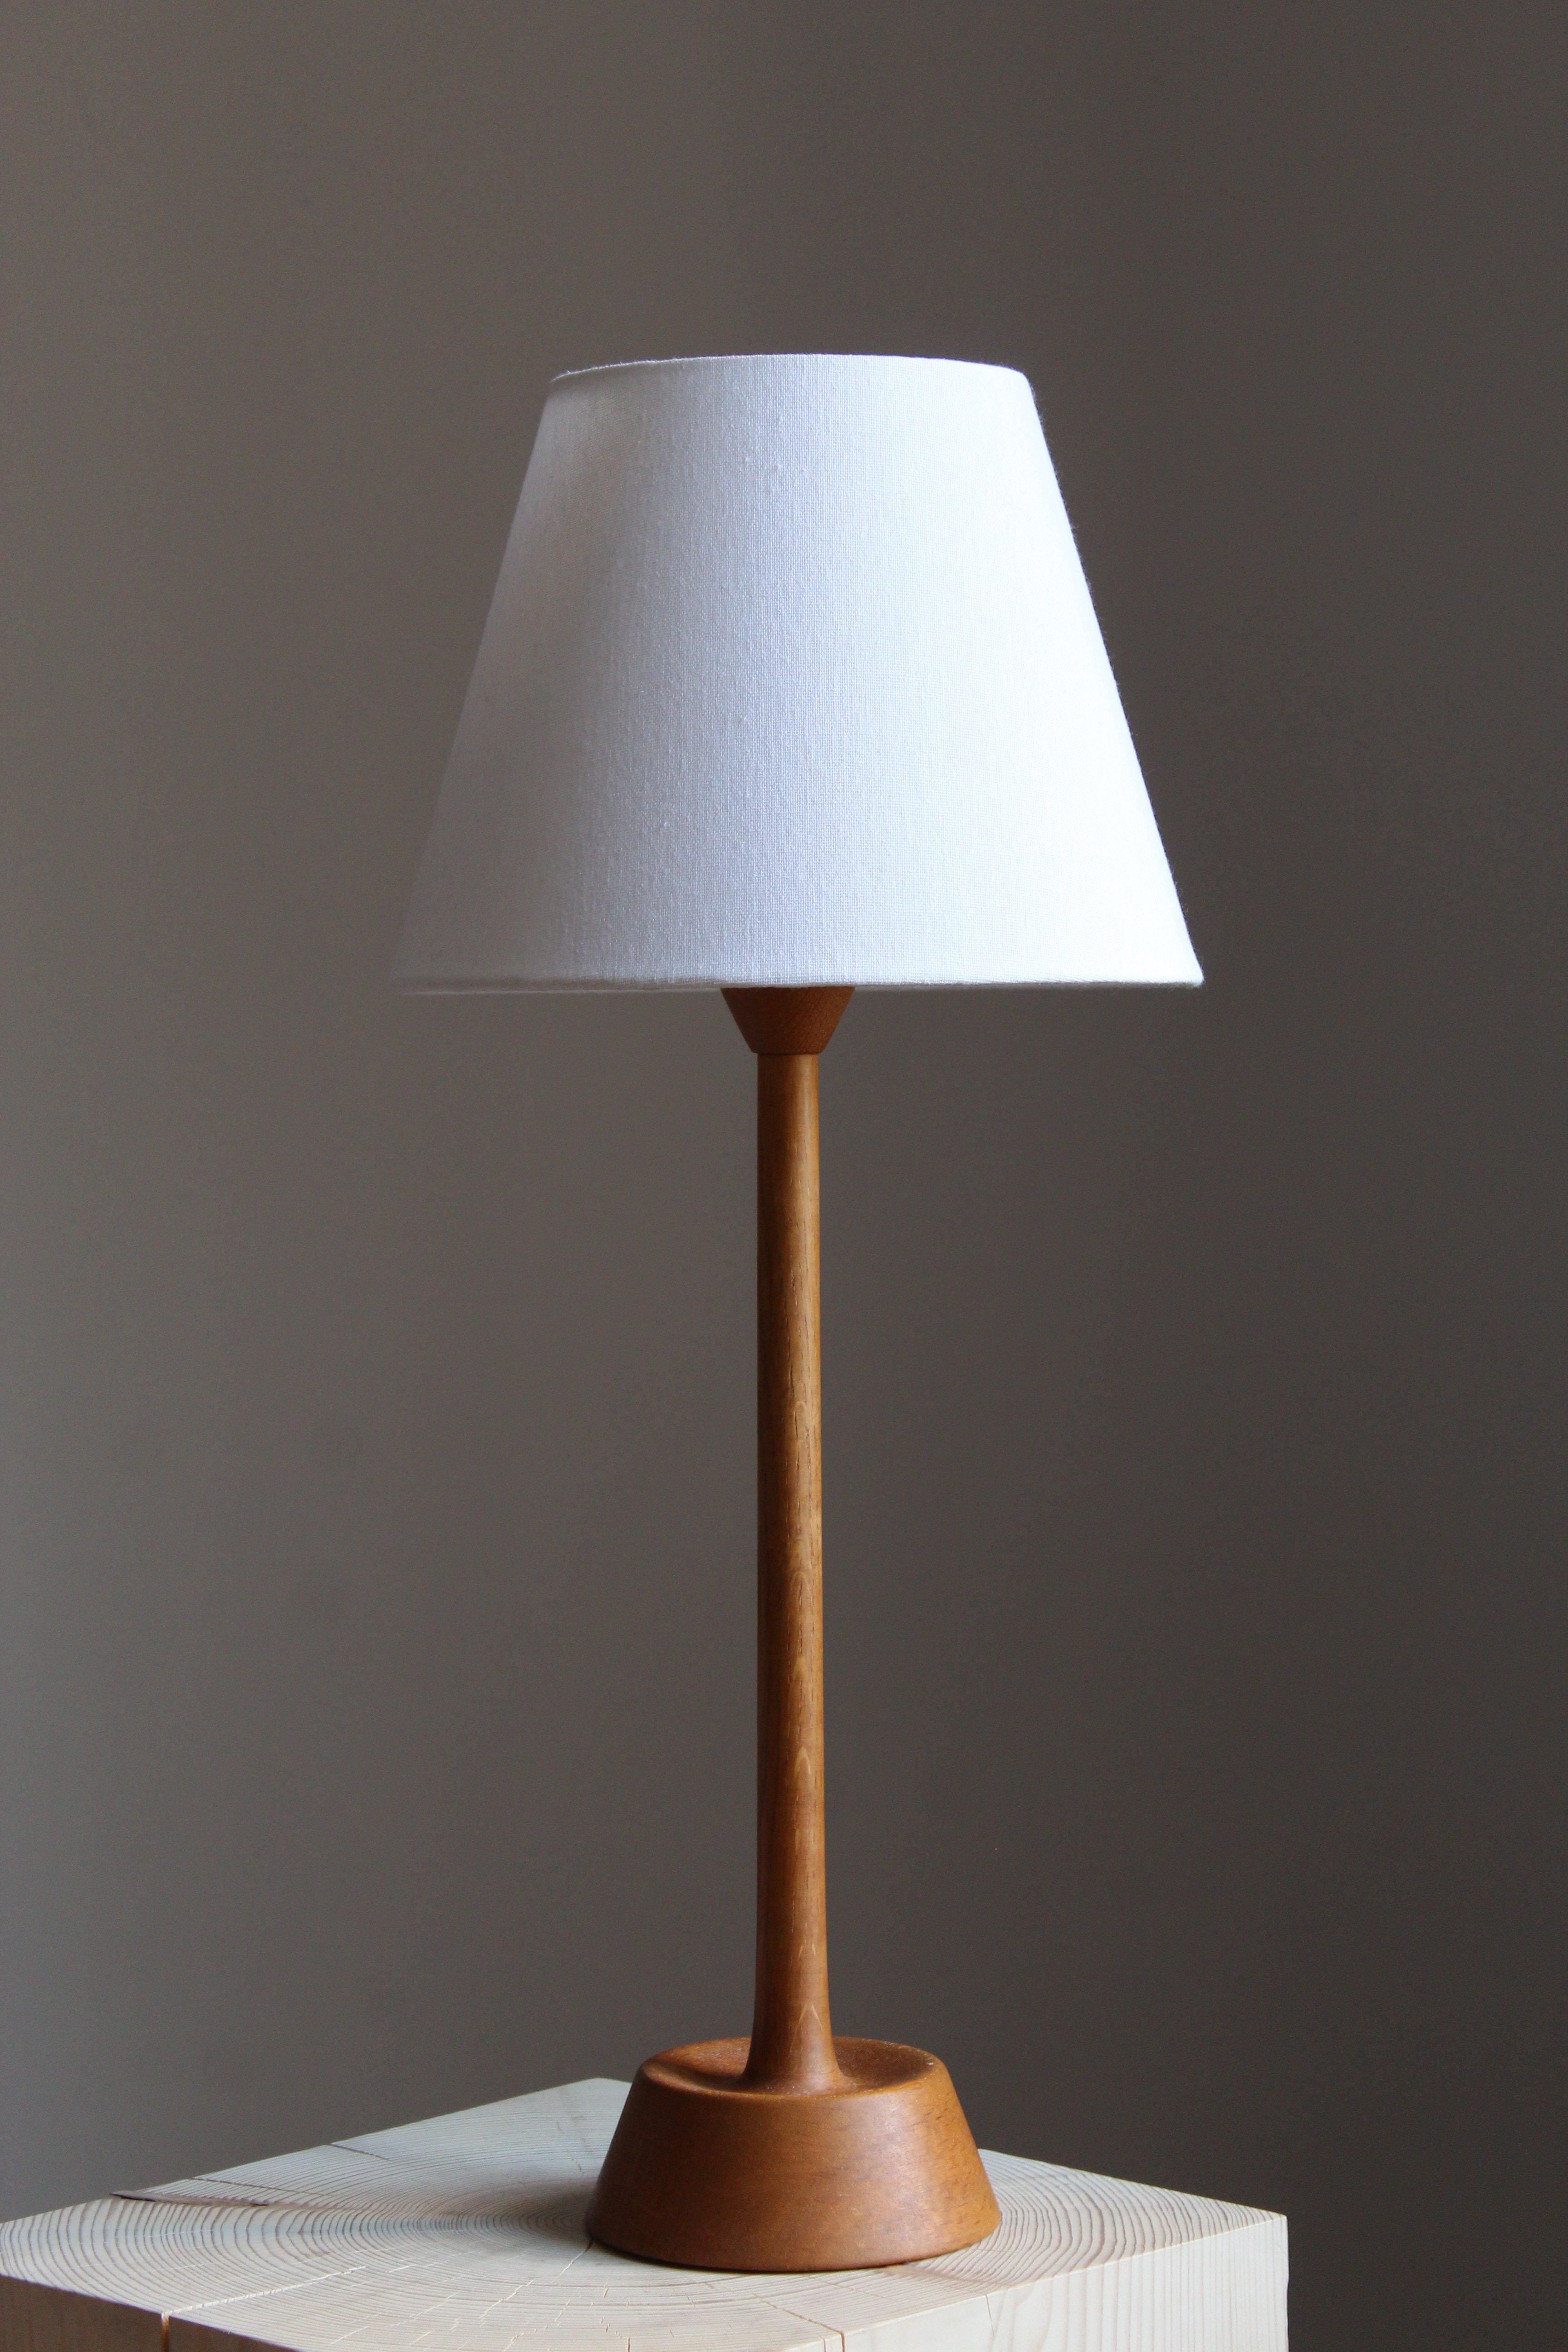 A solid pine table lamp. Designed by Uno Kristiansson, for Luxus, Sweden, 1960s. Lampshade not included.

Other designers of the period include Axel Einar Hjorth, Roland Wilhelmsson, Charlotte Perriand, Pierre Chapo, and Yasha Heifetz.